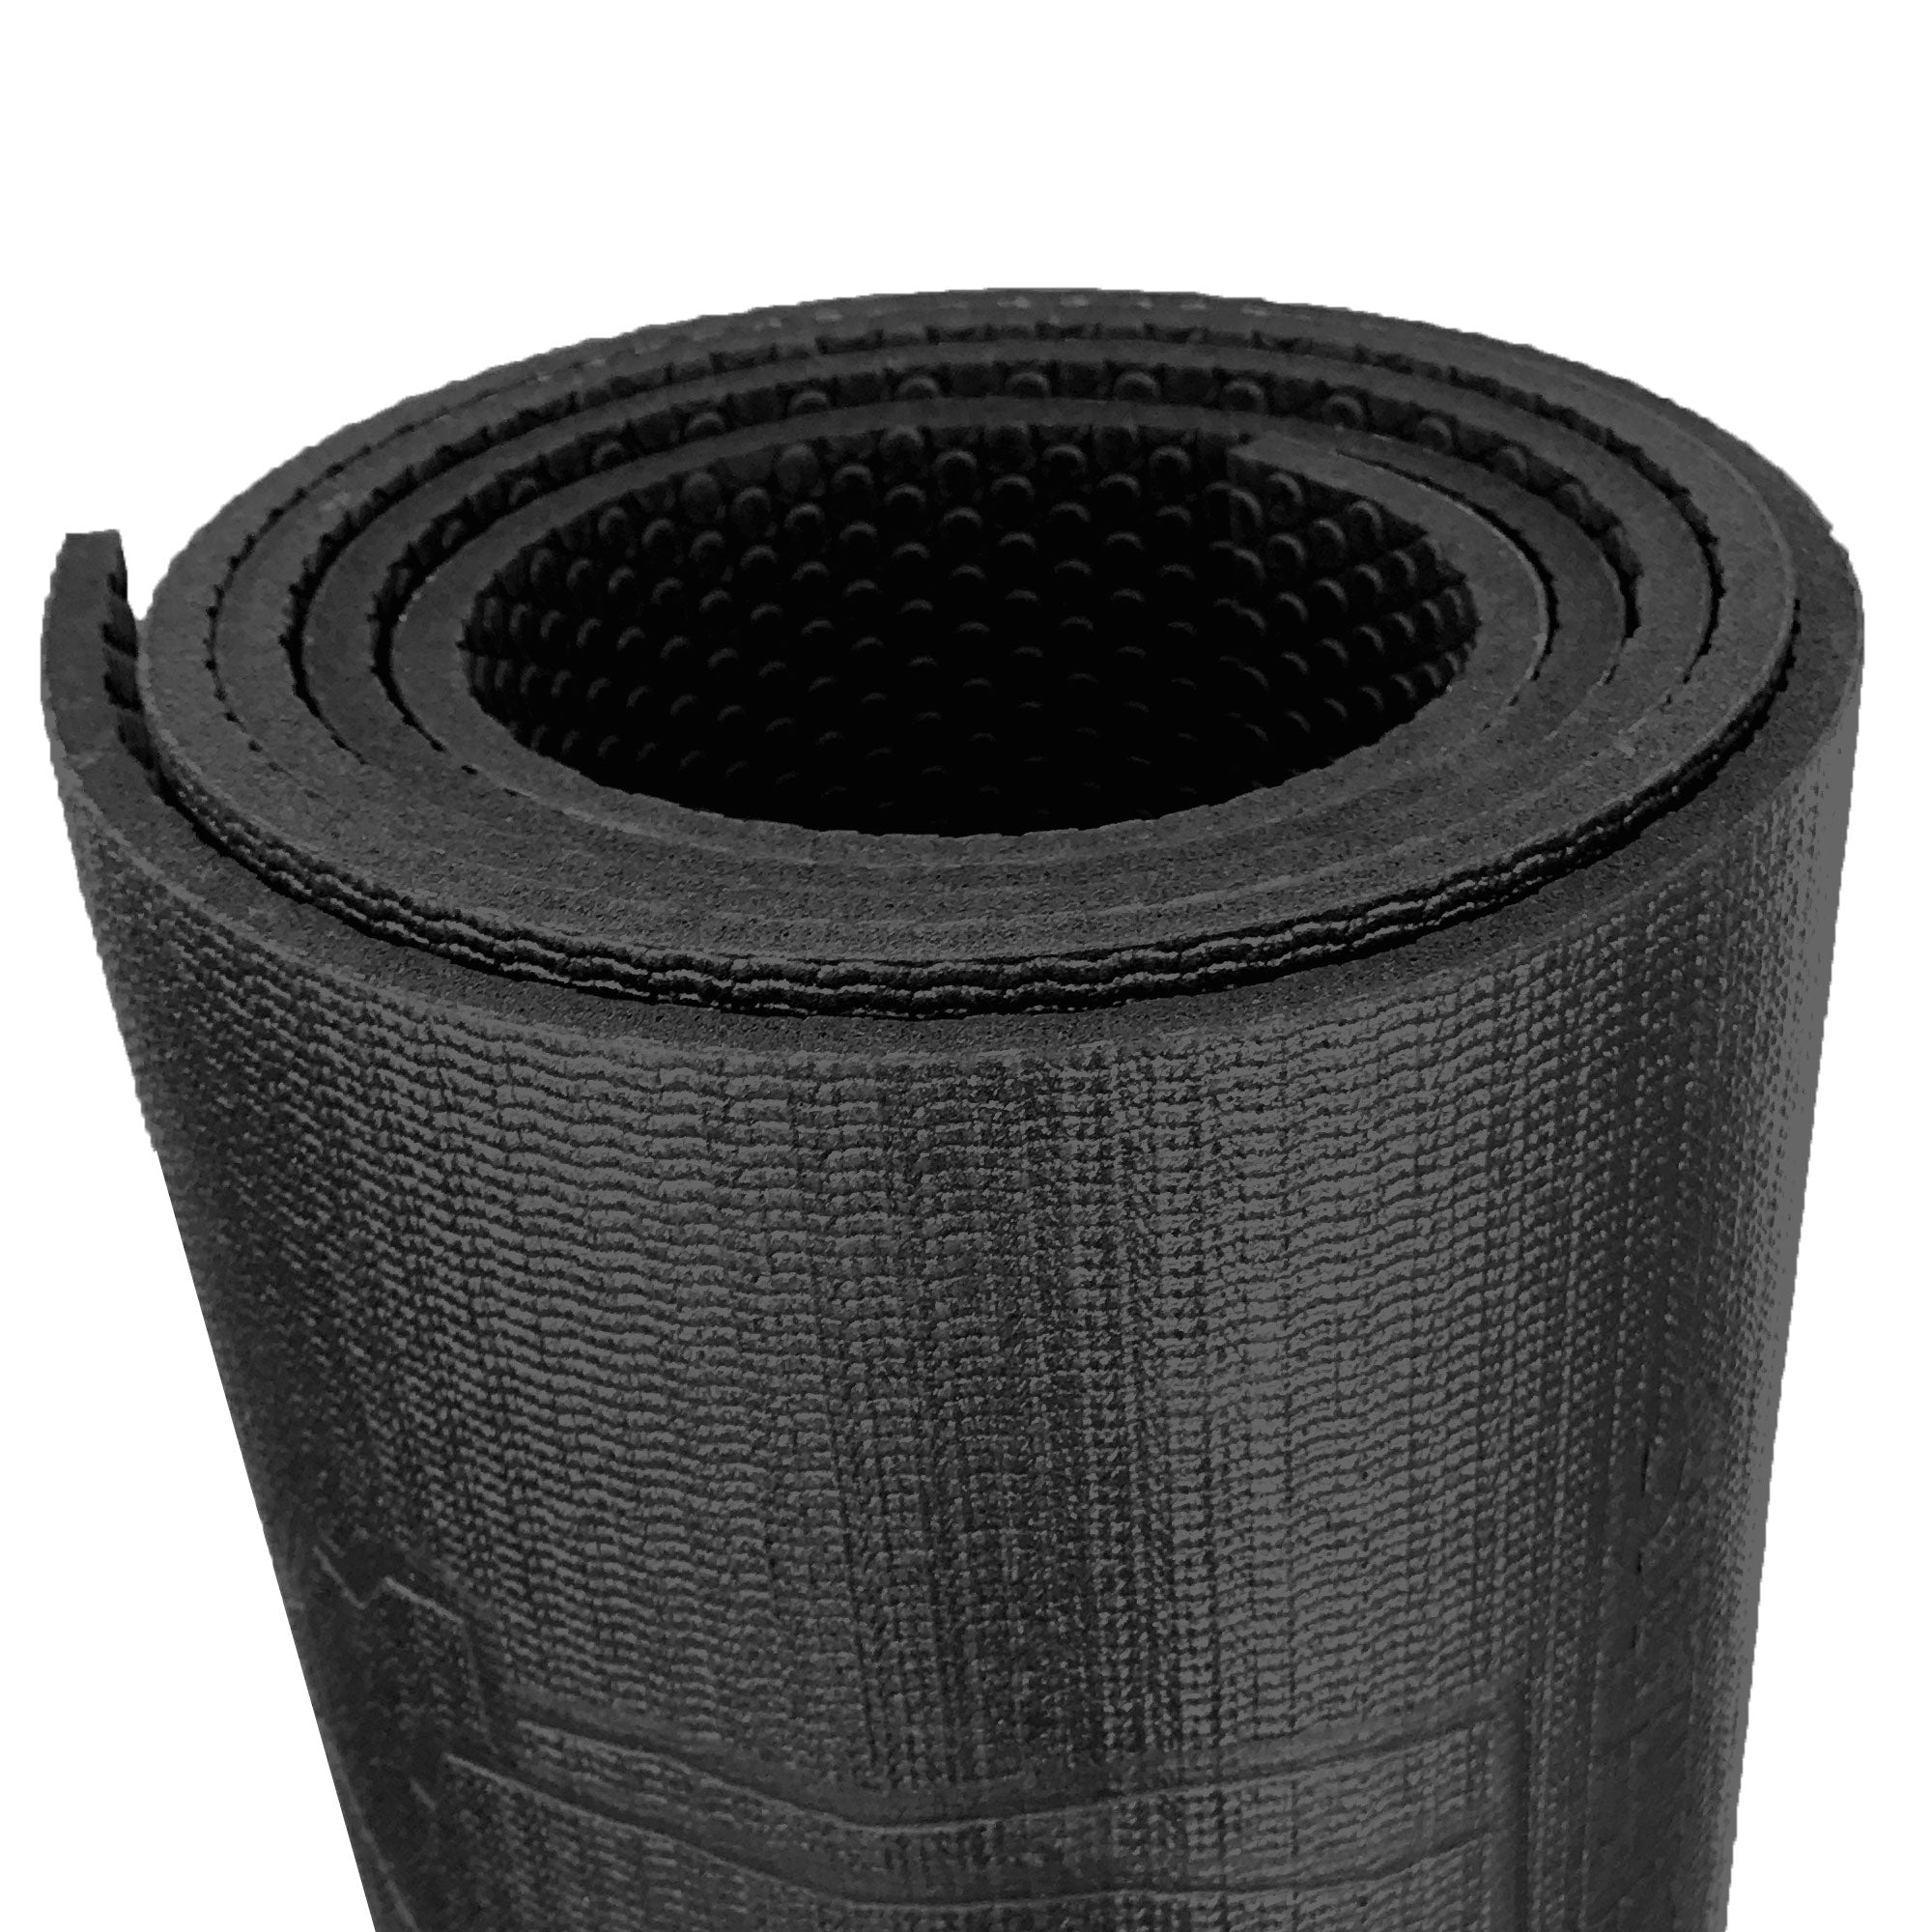 Gorilla Mats Premium Extra Large Exercise Mat – 12' x 6' x 1/4 Ultra  Durable, Non-Slip, Workout Mat for Instant Home Gym Flooring – Works Great  on